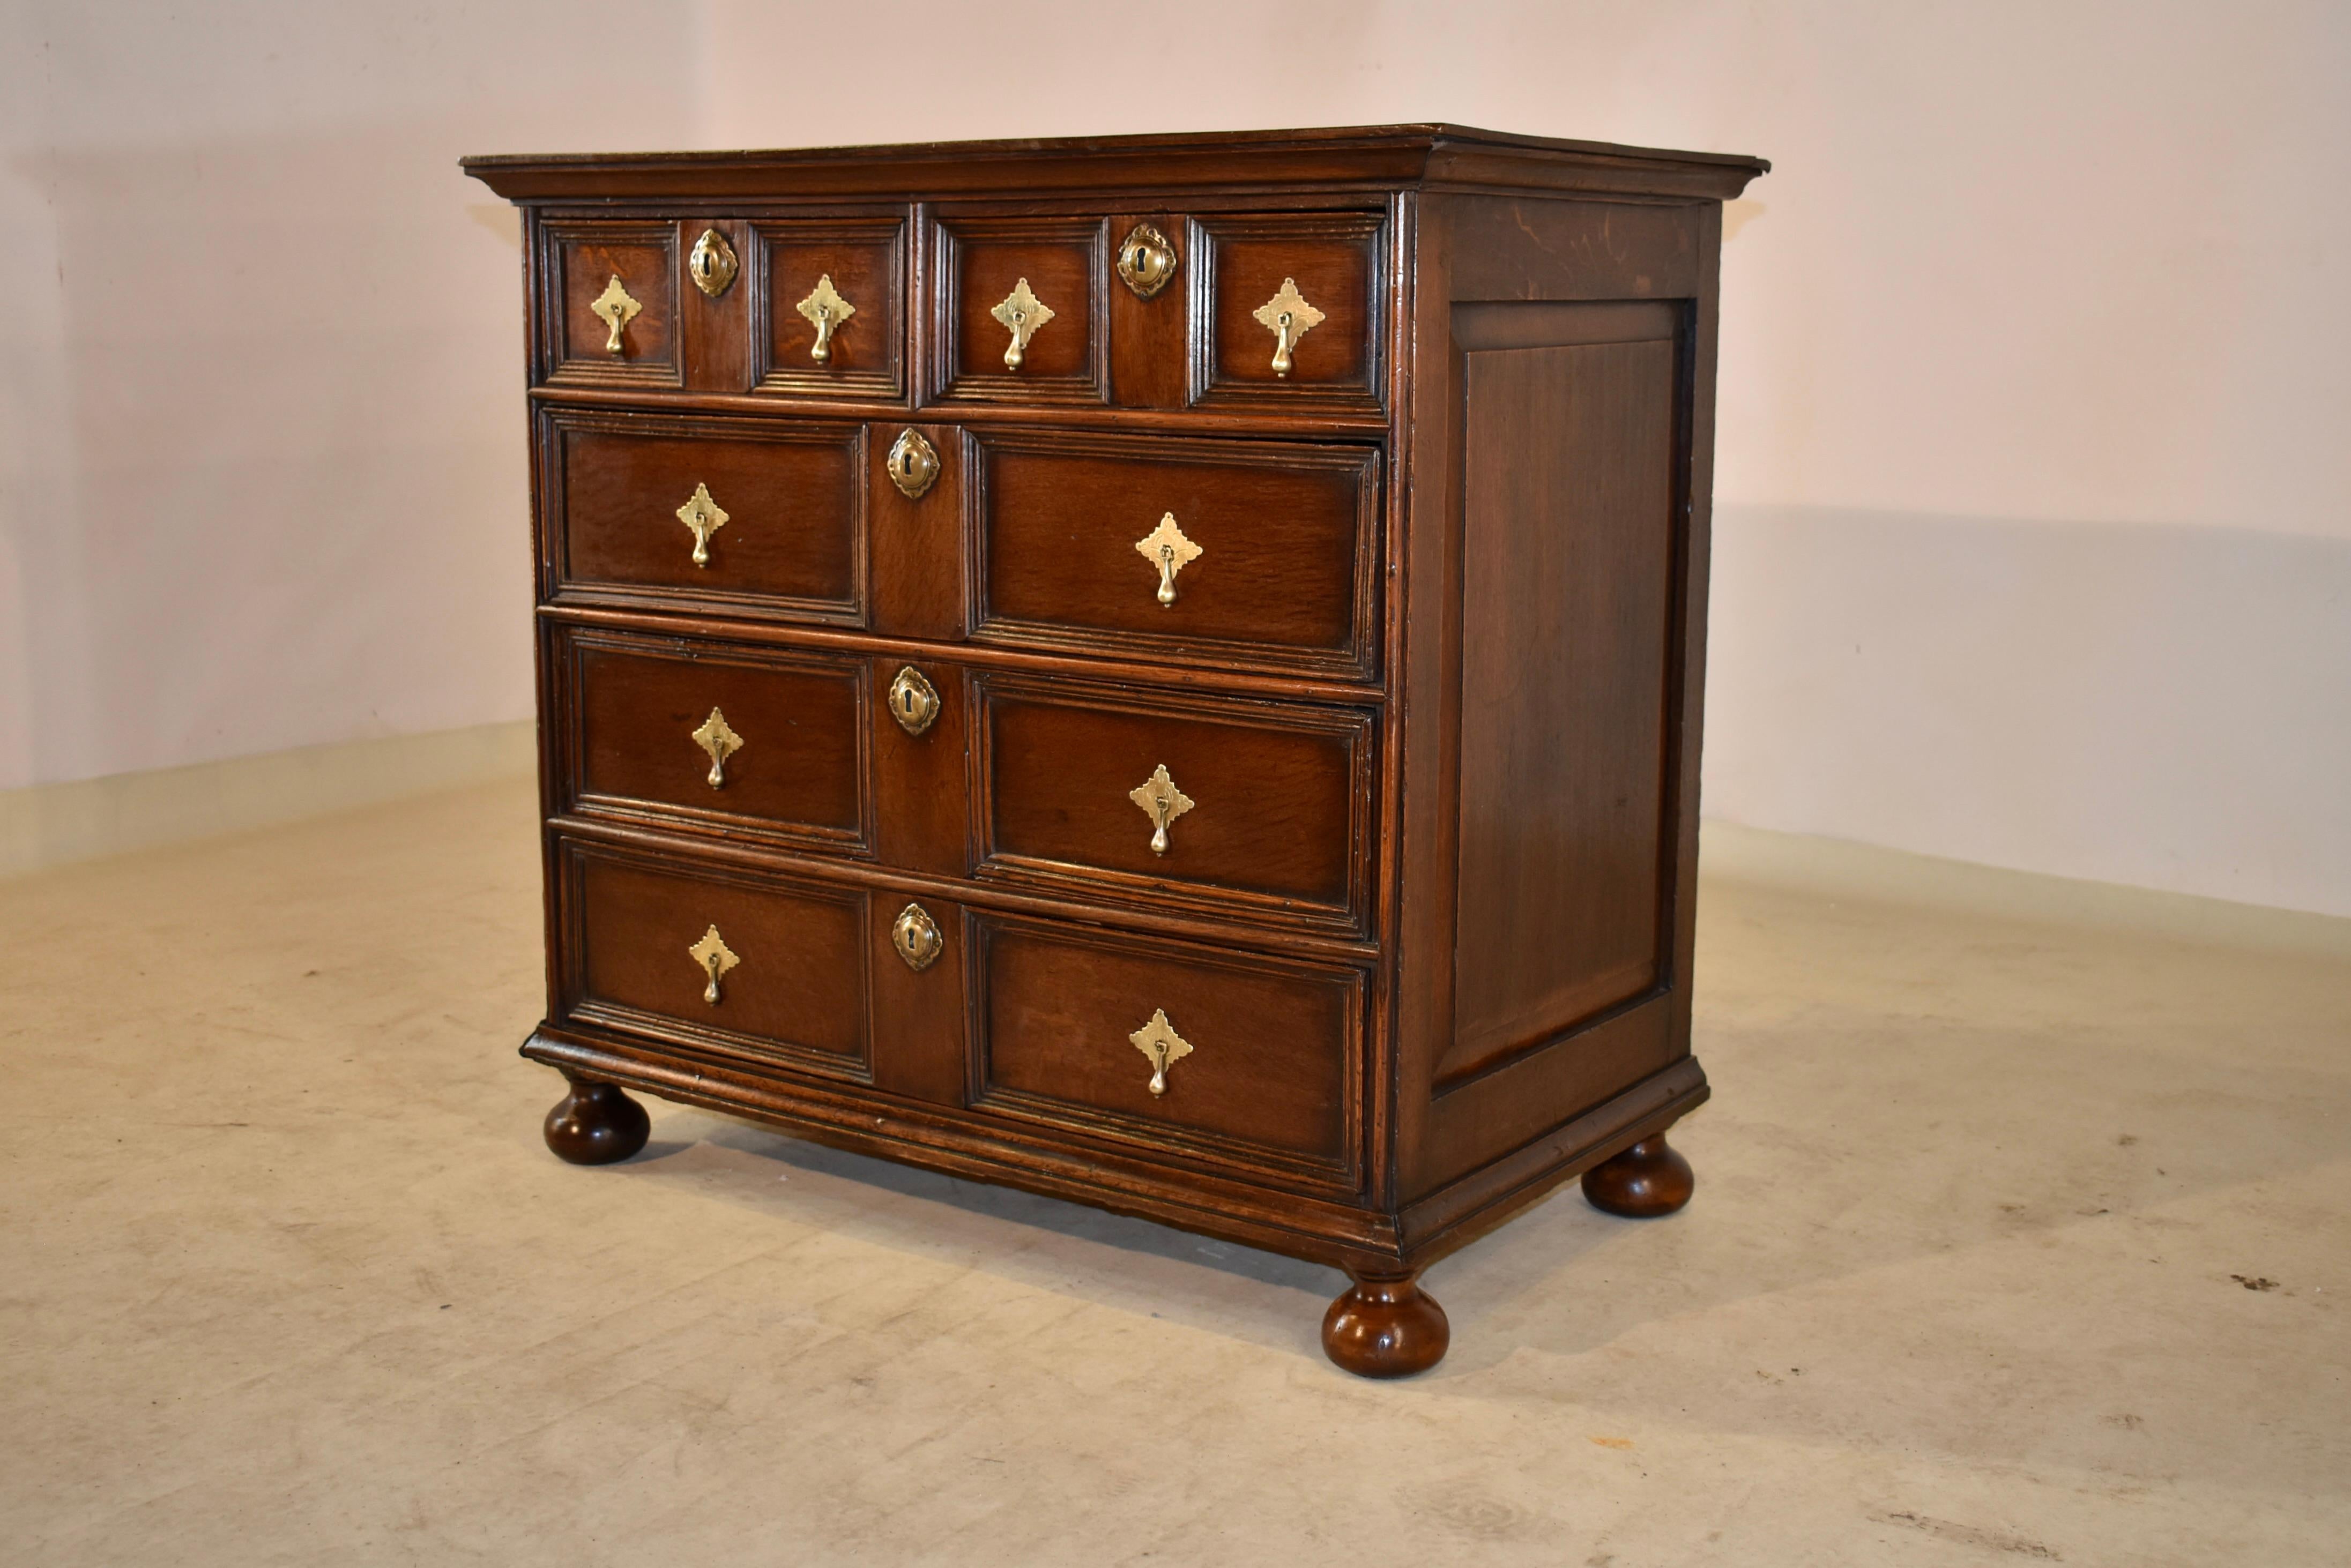 Early 18th Century Paneled Chest of Drawers In Good Condition For Sale In High Point, NC